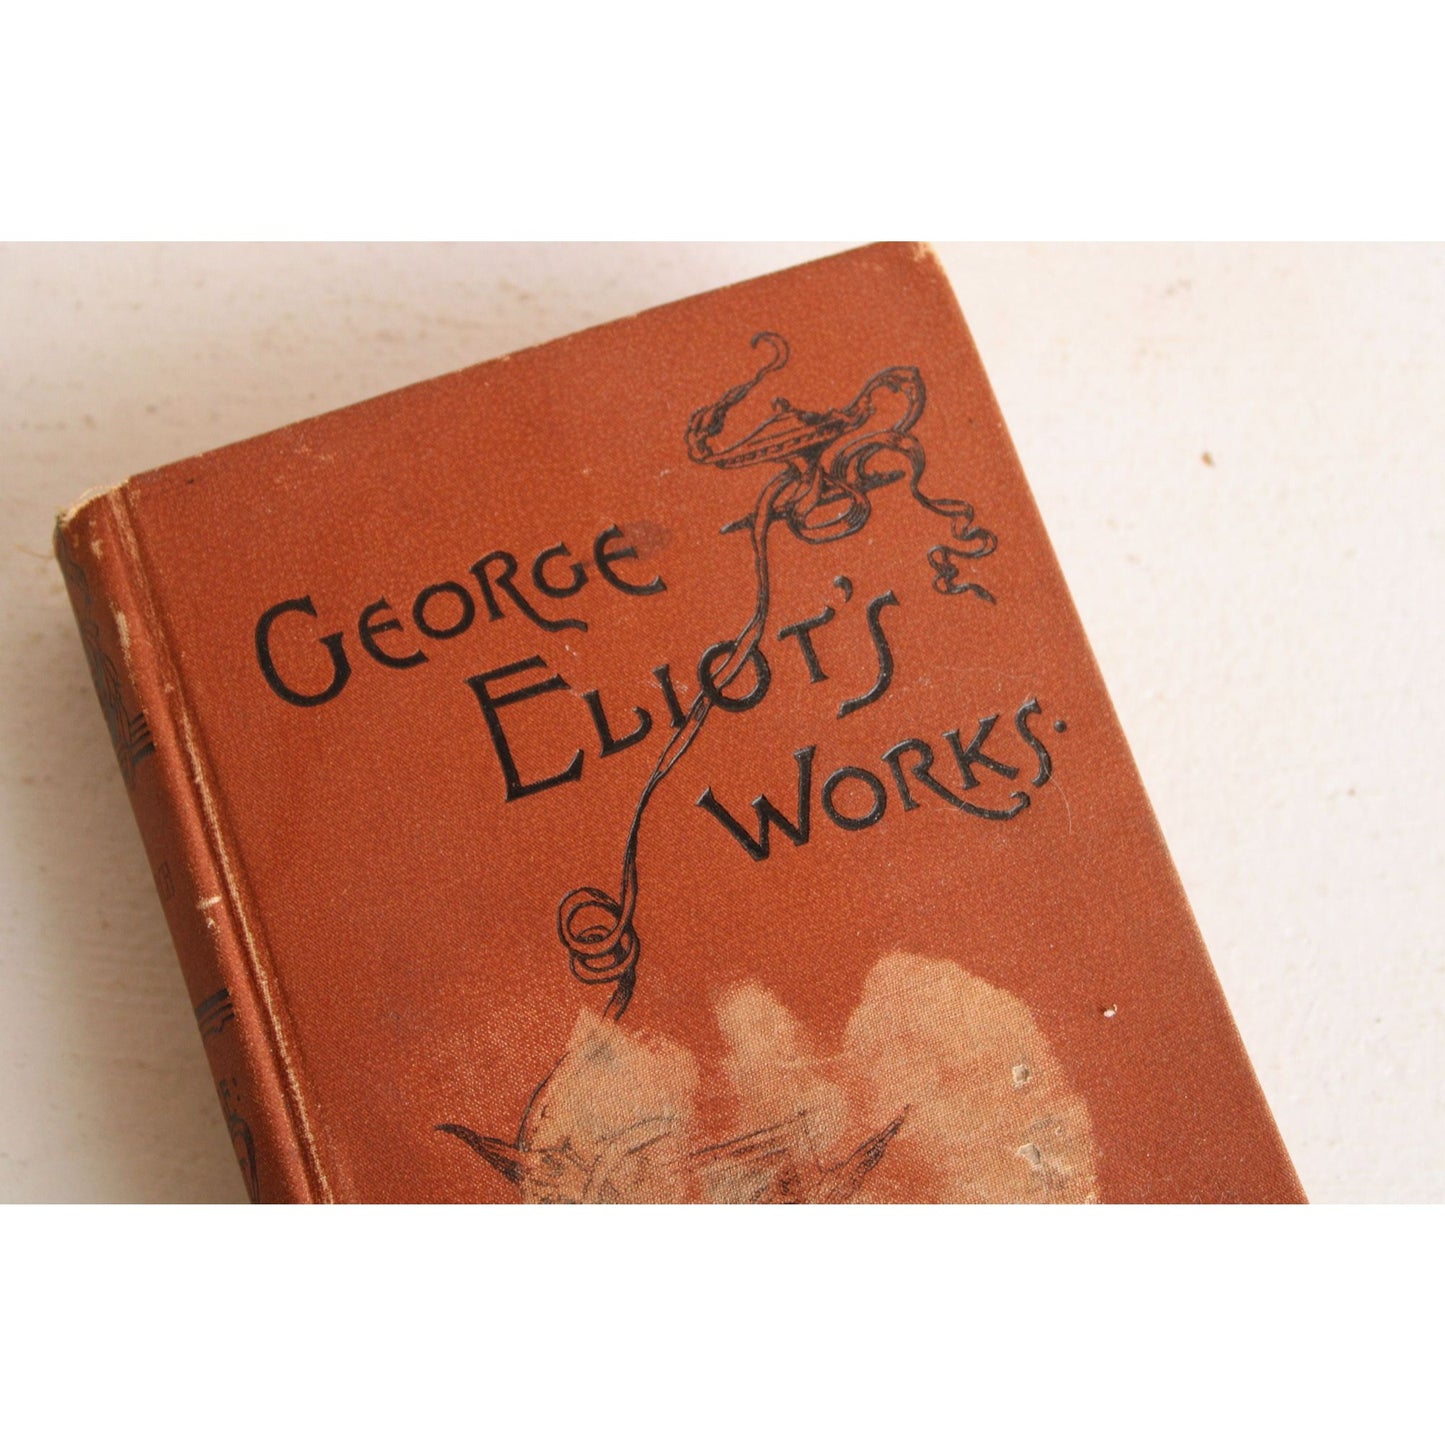 Antique 1890s Book, George Elliot, "MIddlemarch"